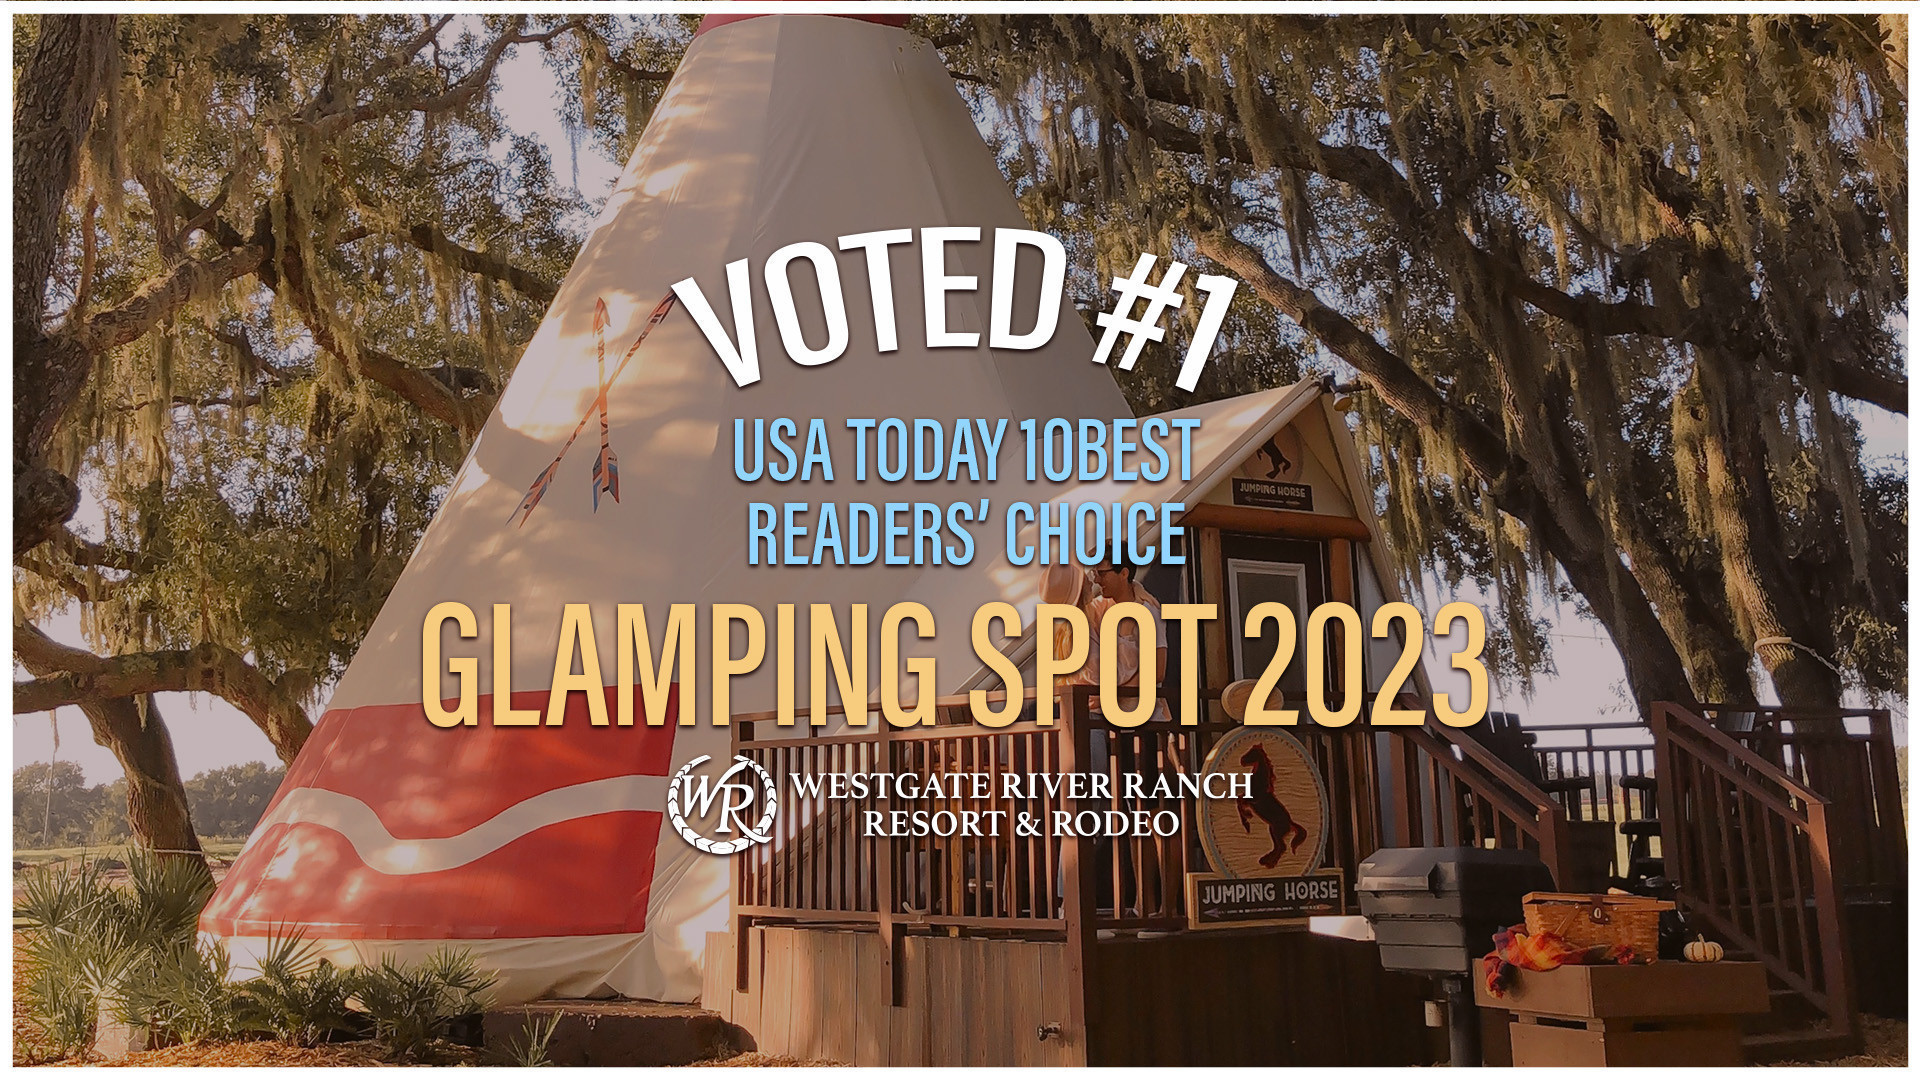 Westgate River Ranch Resort & Rodeo Earns #1 Glamping Spot in USA Today 10Best